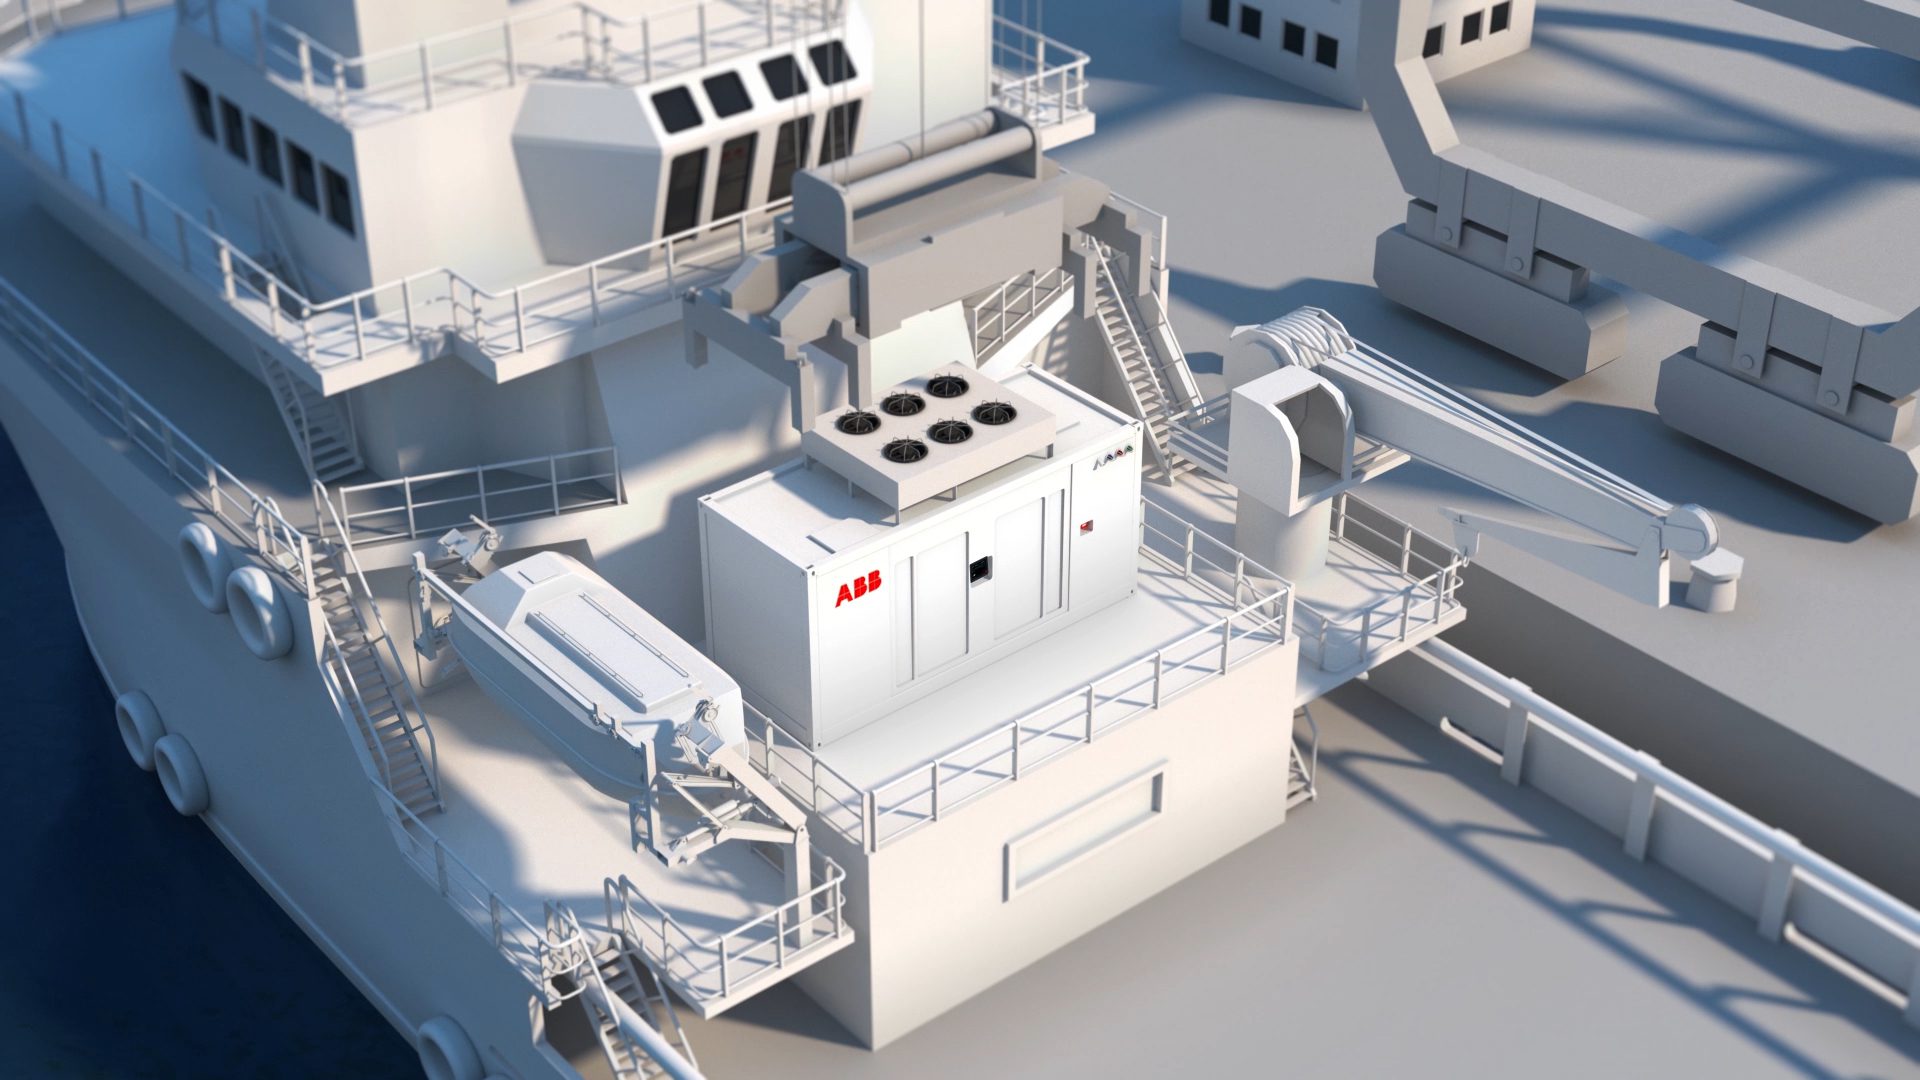 ABB containerized energy storage offers plug-in battery power for a wide range of ships